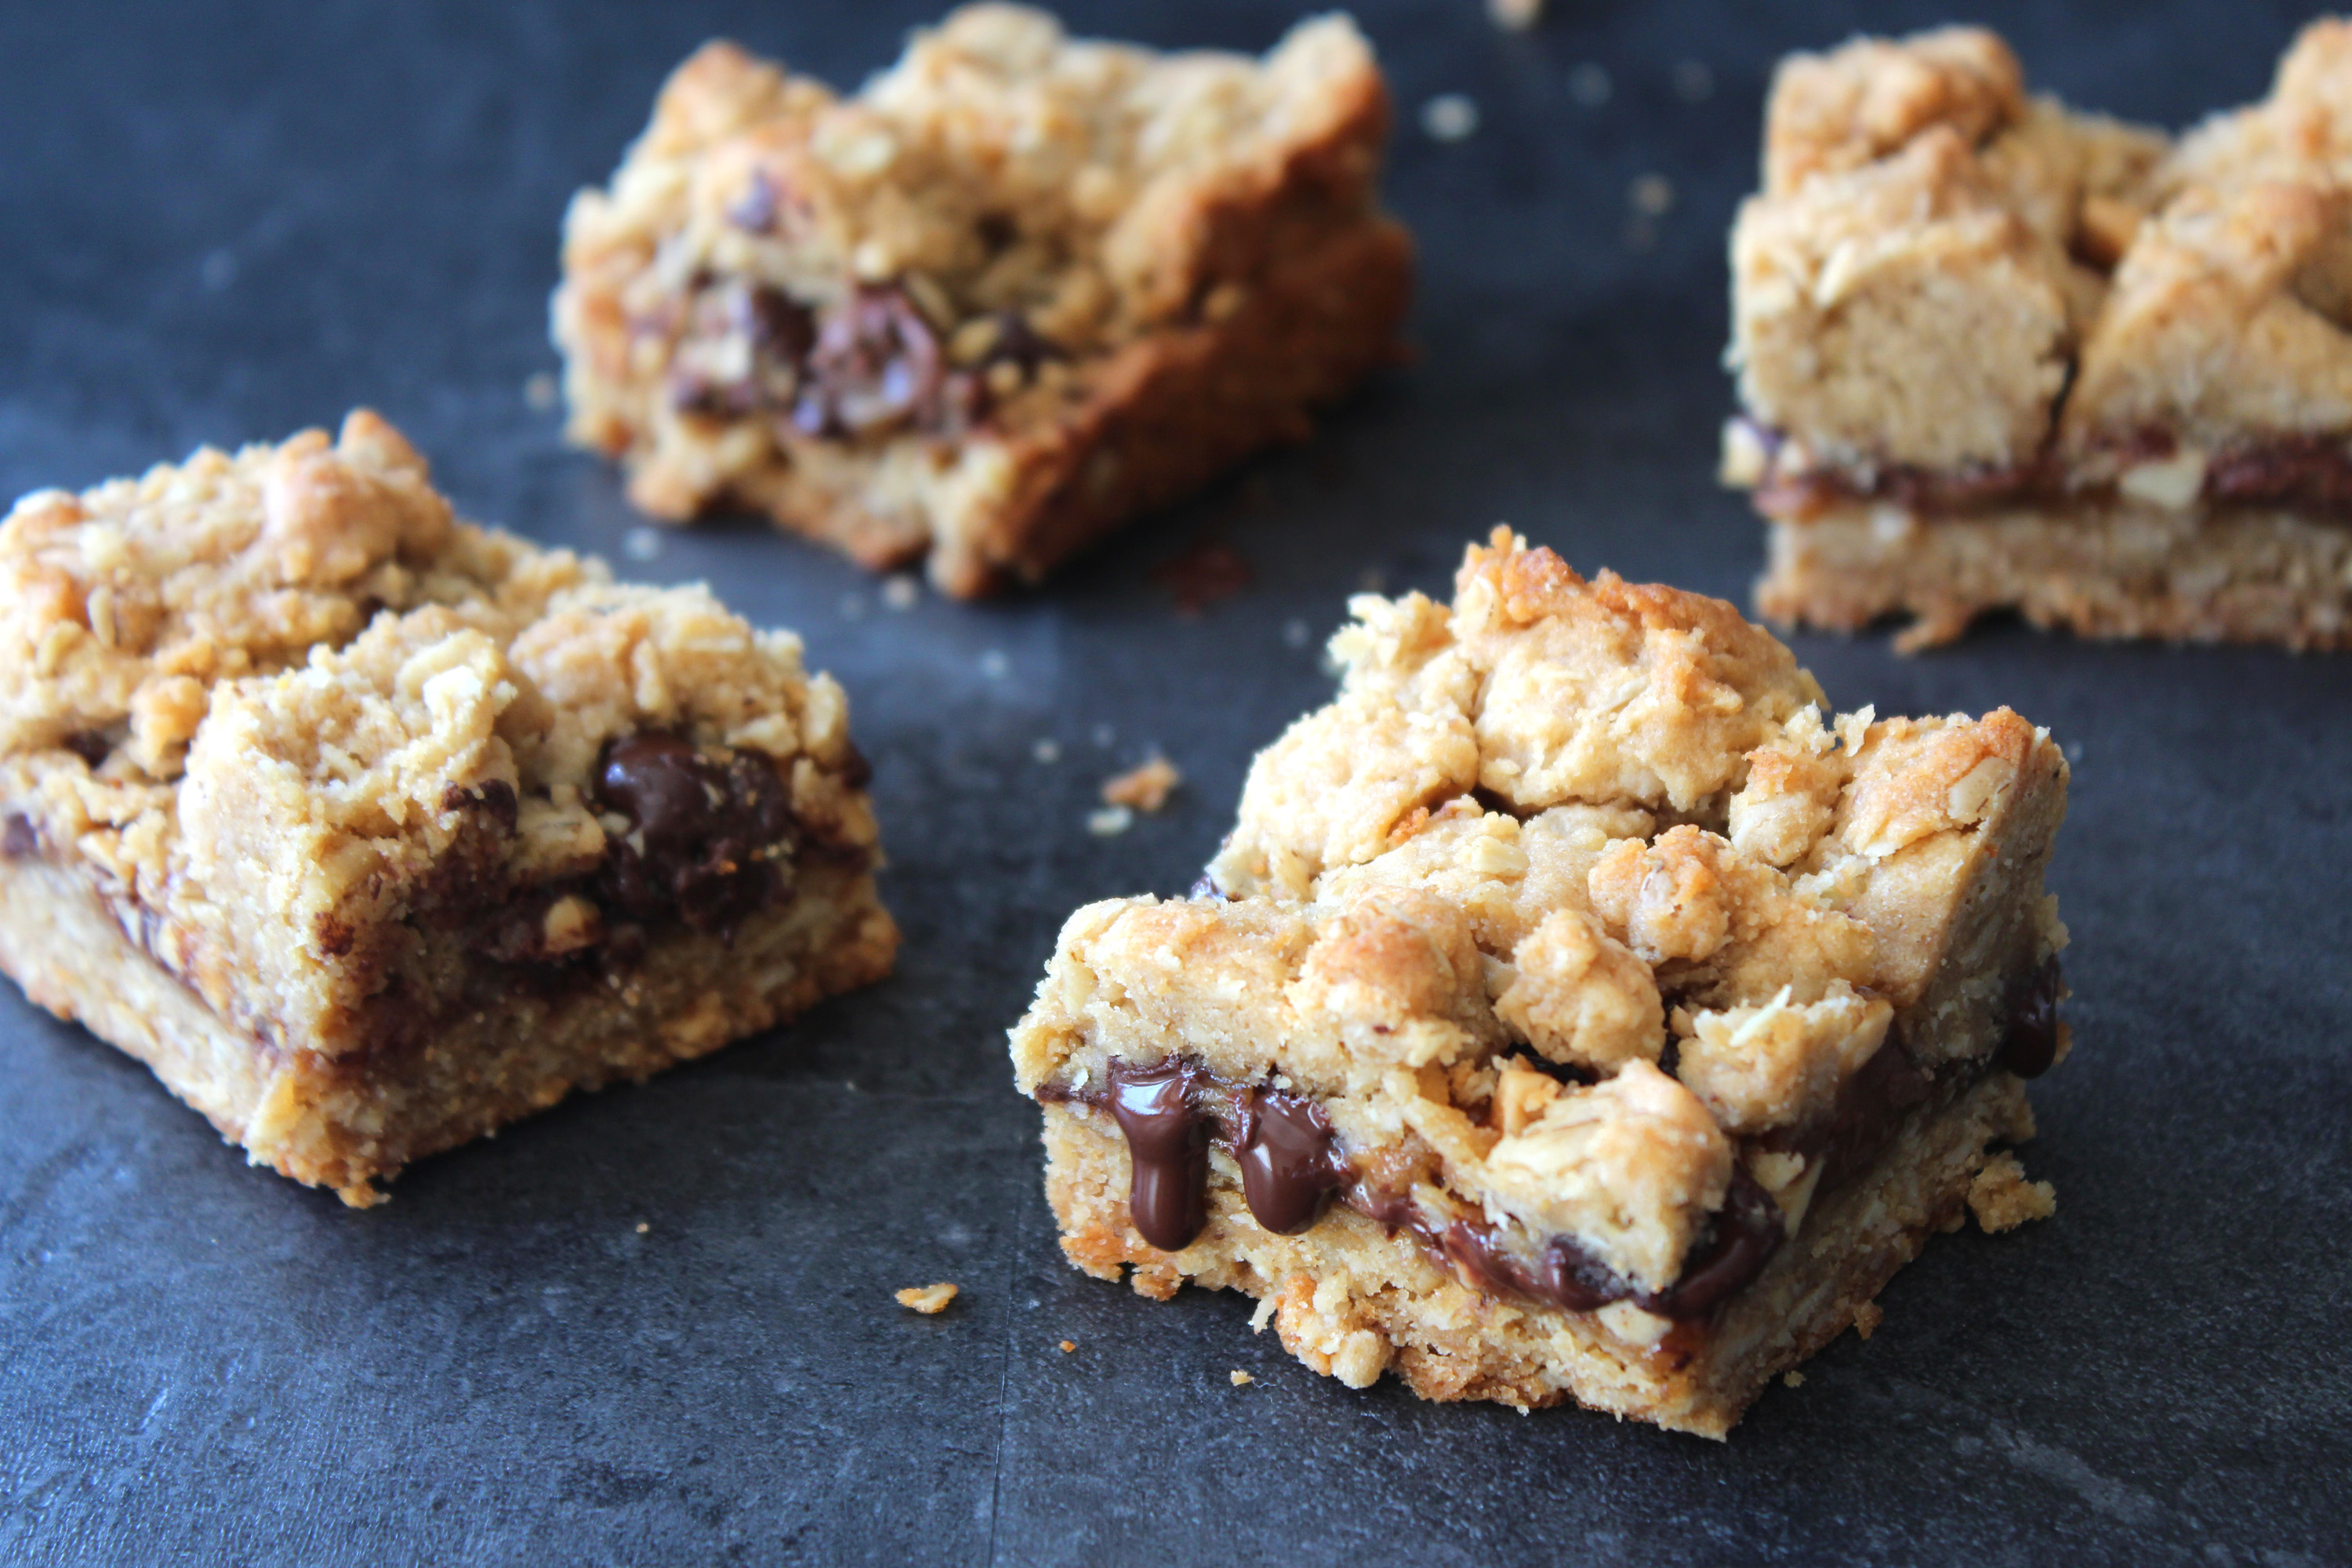 Crunchy Peanut Butter Oat Caramel and Nut Crumble Bars